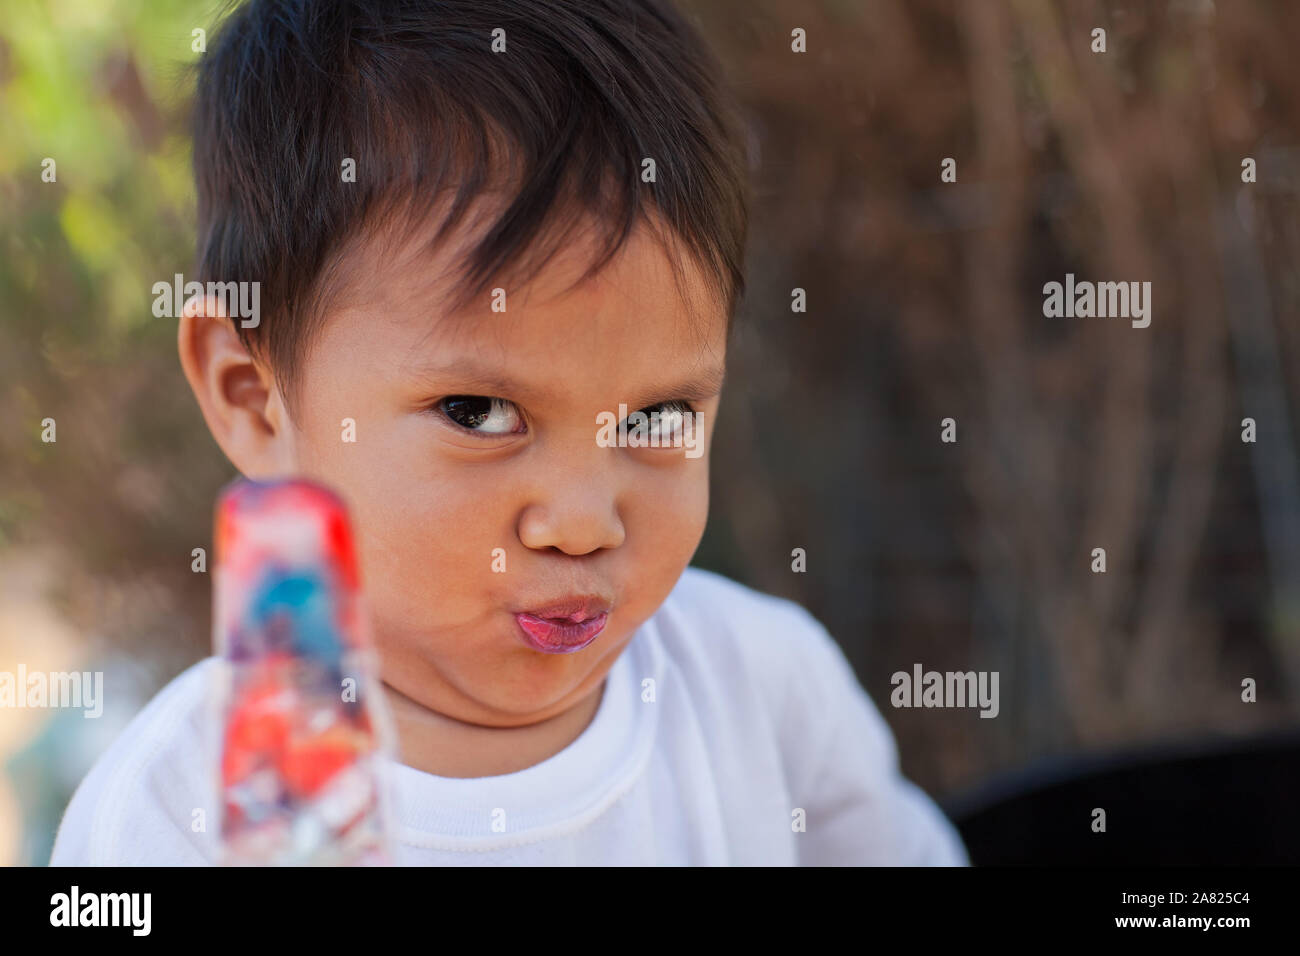 A little boy making a funny facial expression after tasting an ice pop treat and finding it too sour. Stock Photo